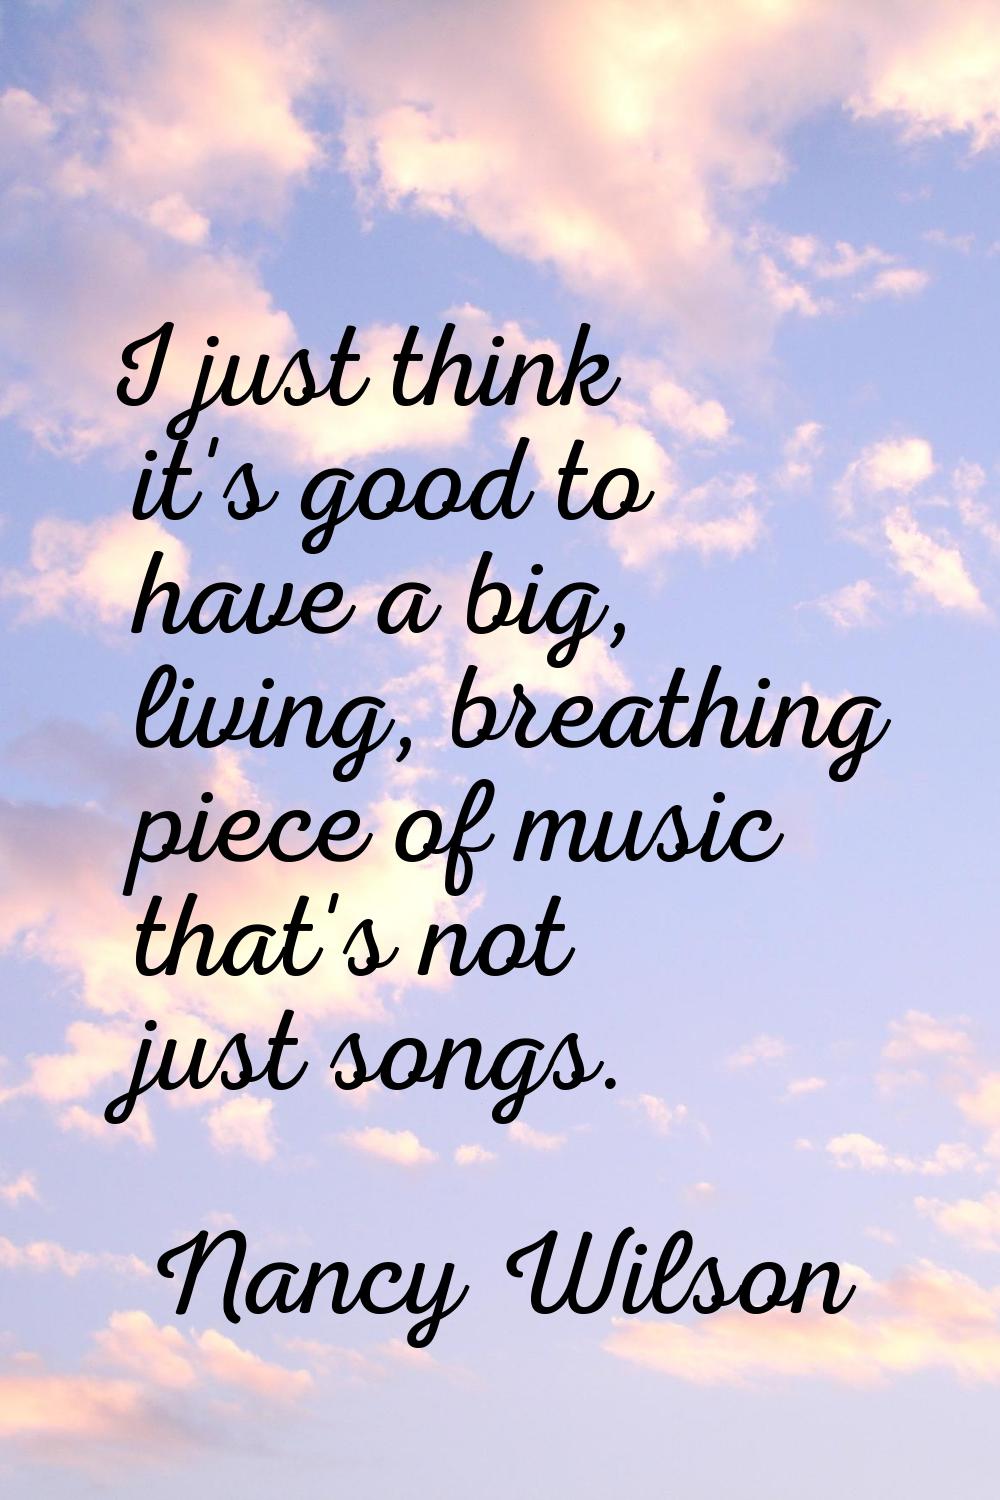 I just think it's good to have a big, living, breathing piece of music that's not just songs.